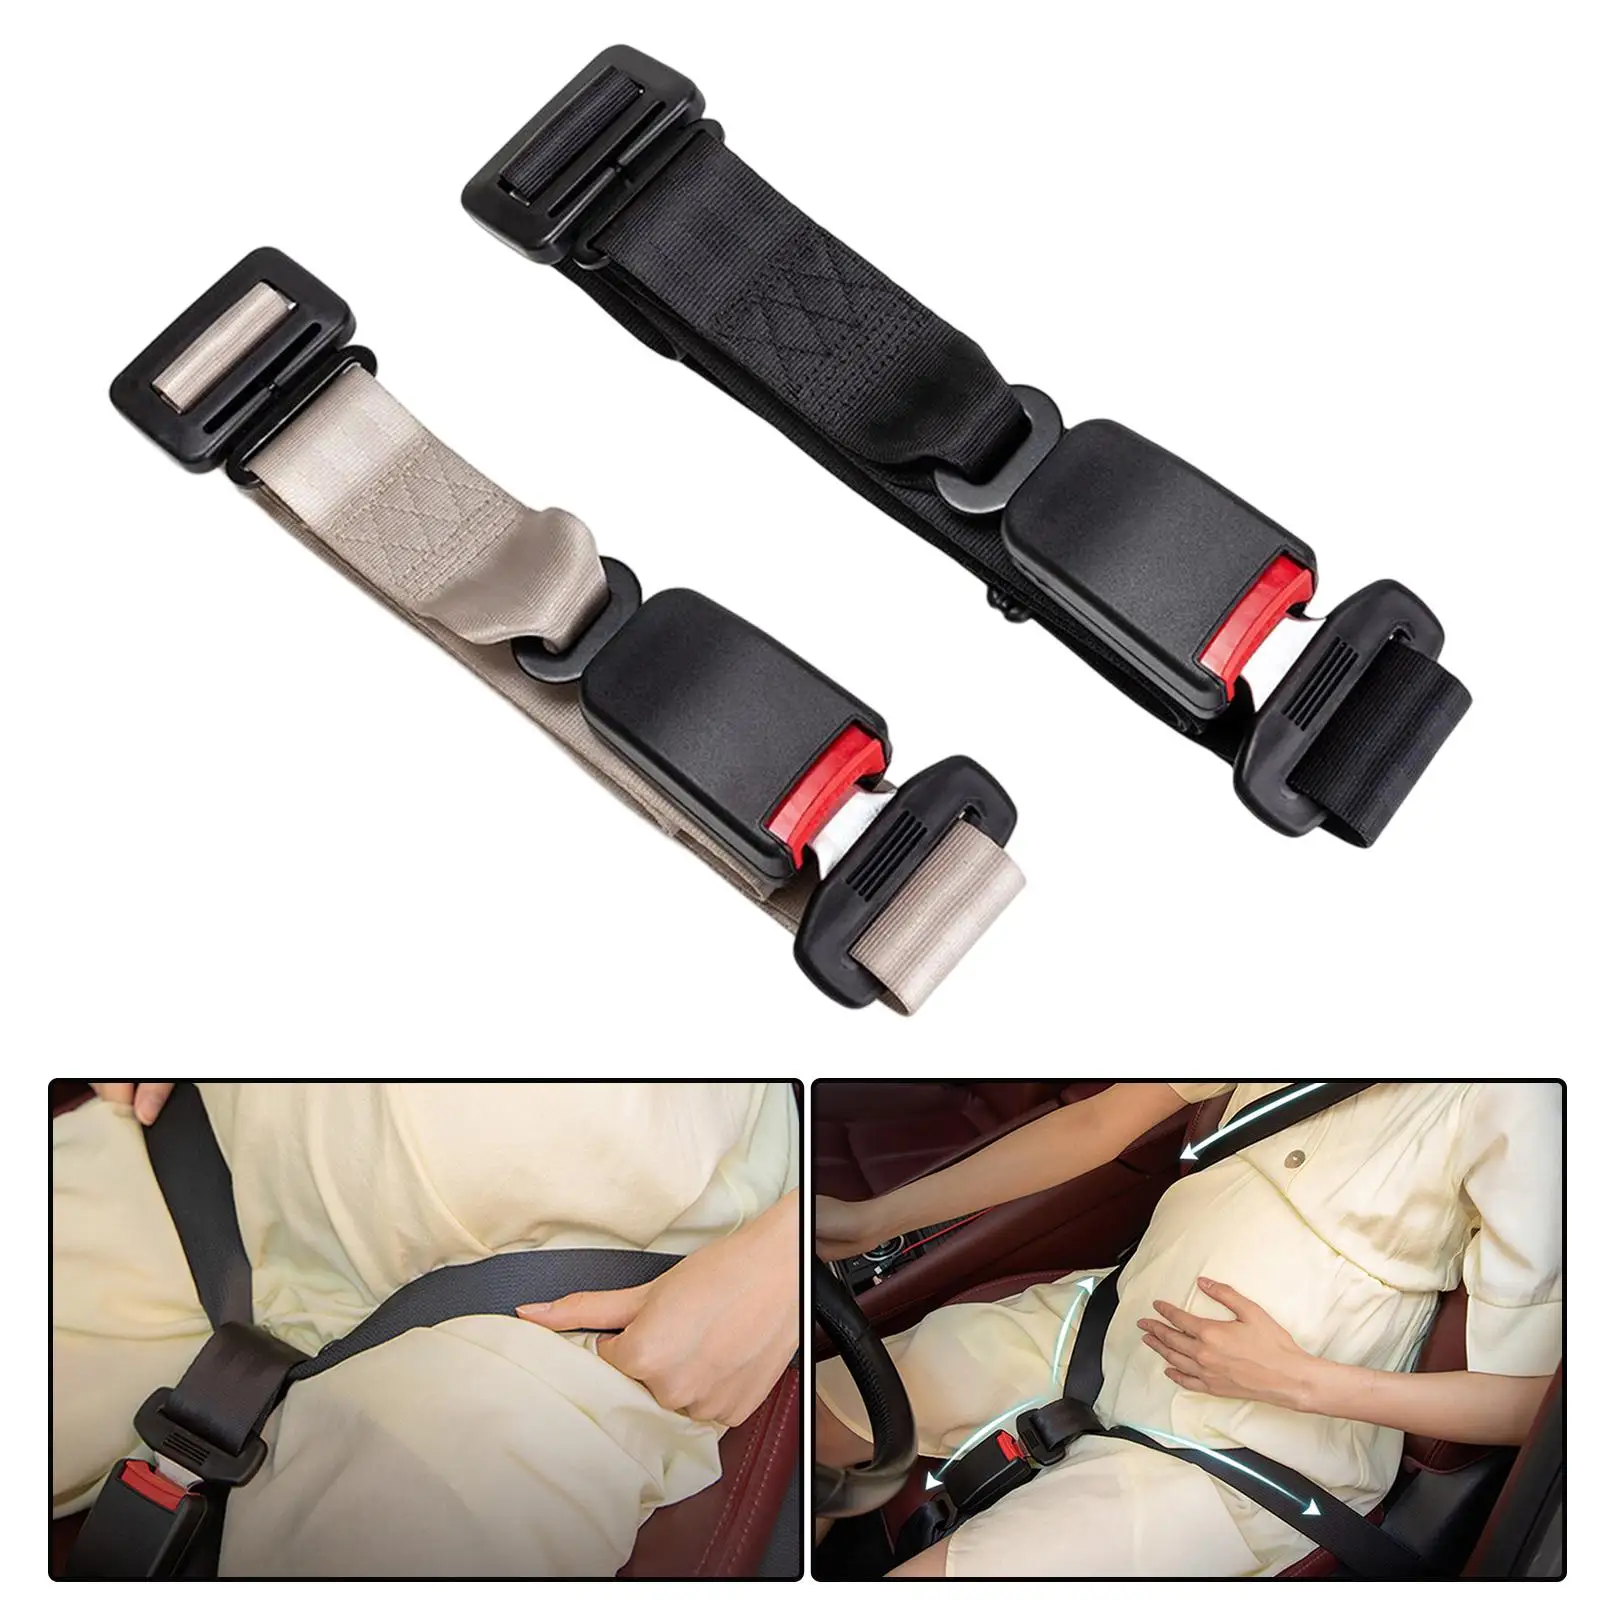 Pregnancy Seat Safety Belt Protect Unborn Baby Adjuster for Pregnancy Woman